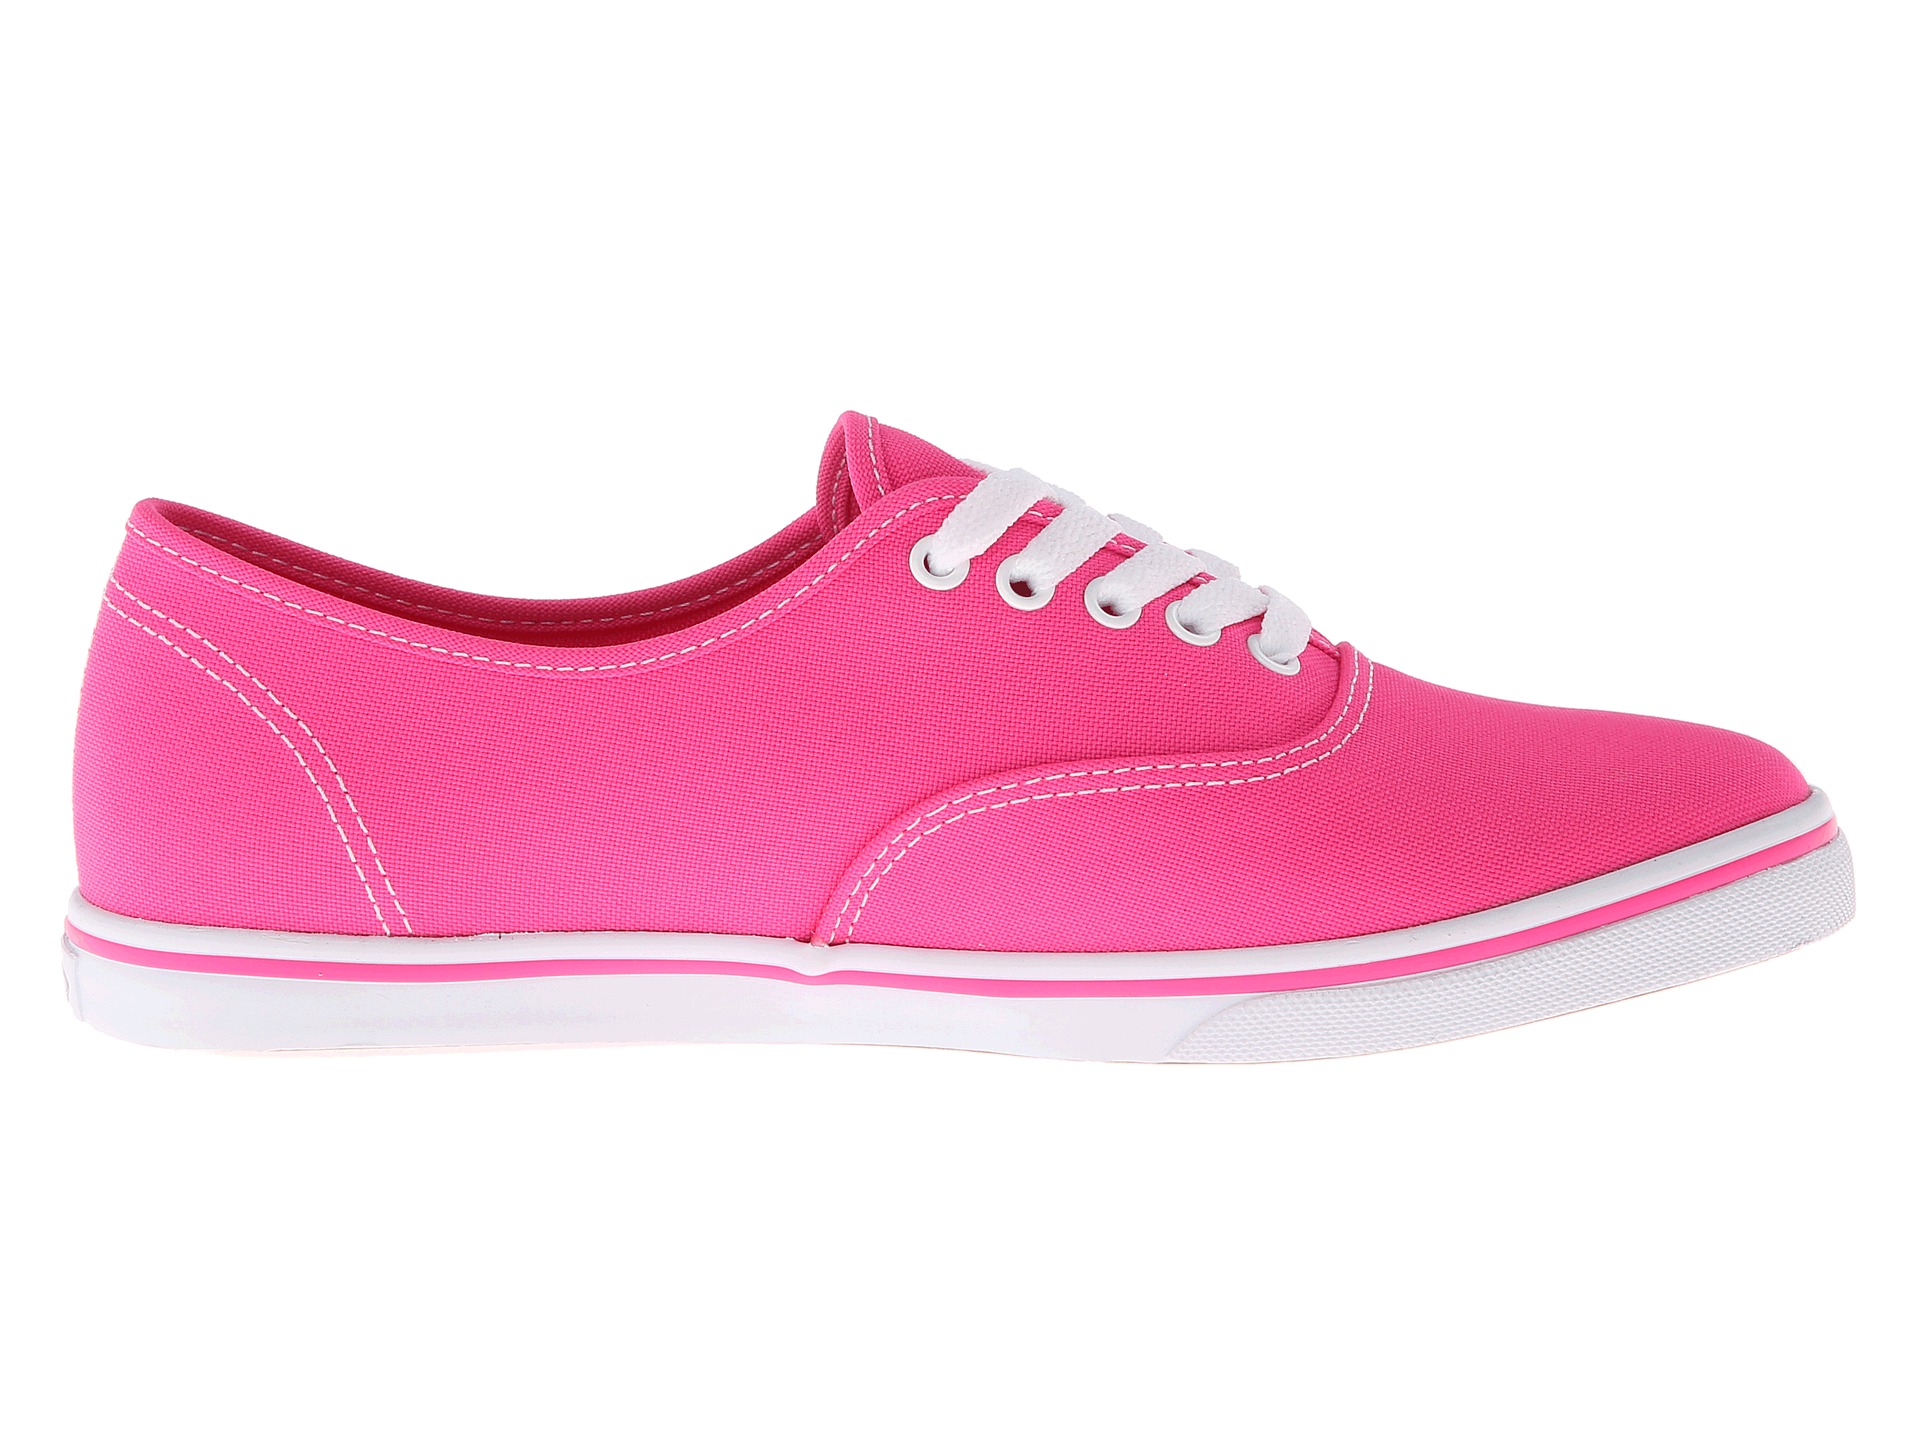 Vans Authentic™ Lo Pro (Neon) Pink Glo - Zappos.com Free Shipping BOTH Ways